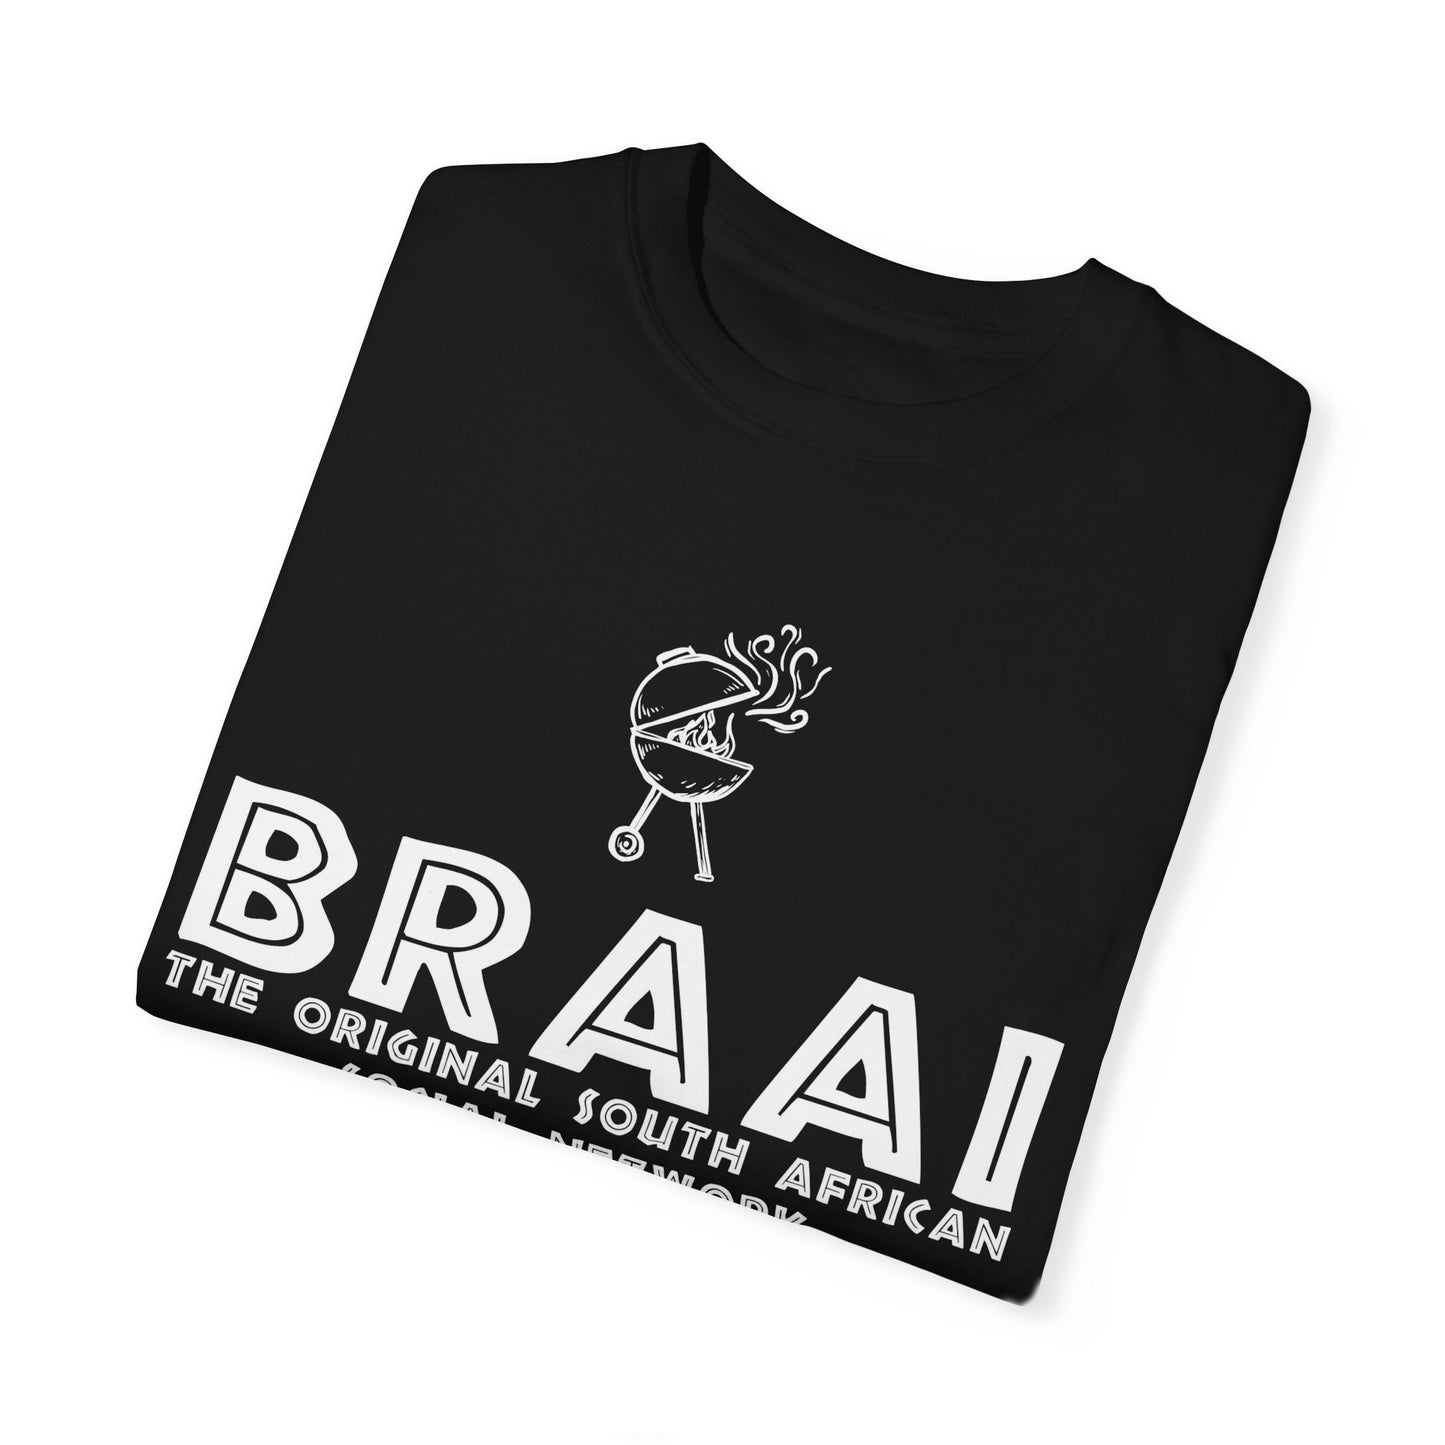 Braai - The Original South African Social Network, Now Available in Canada.